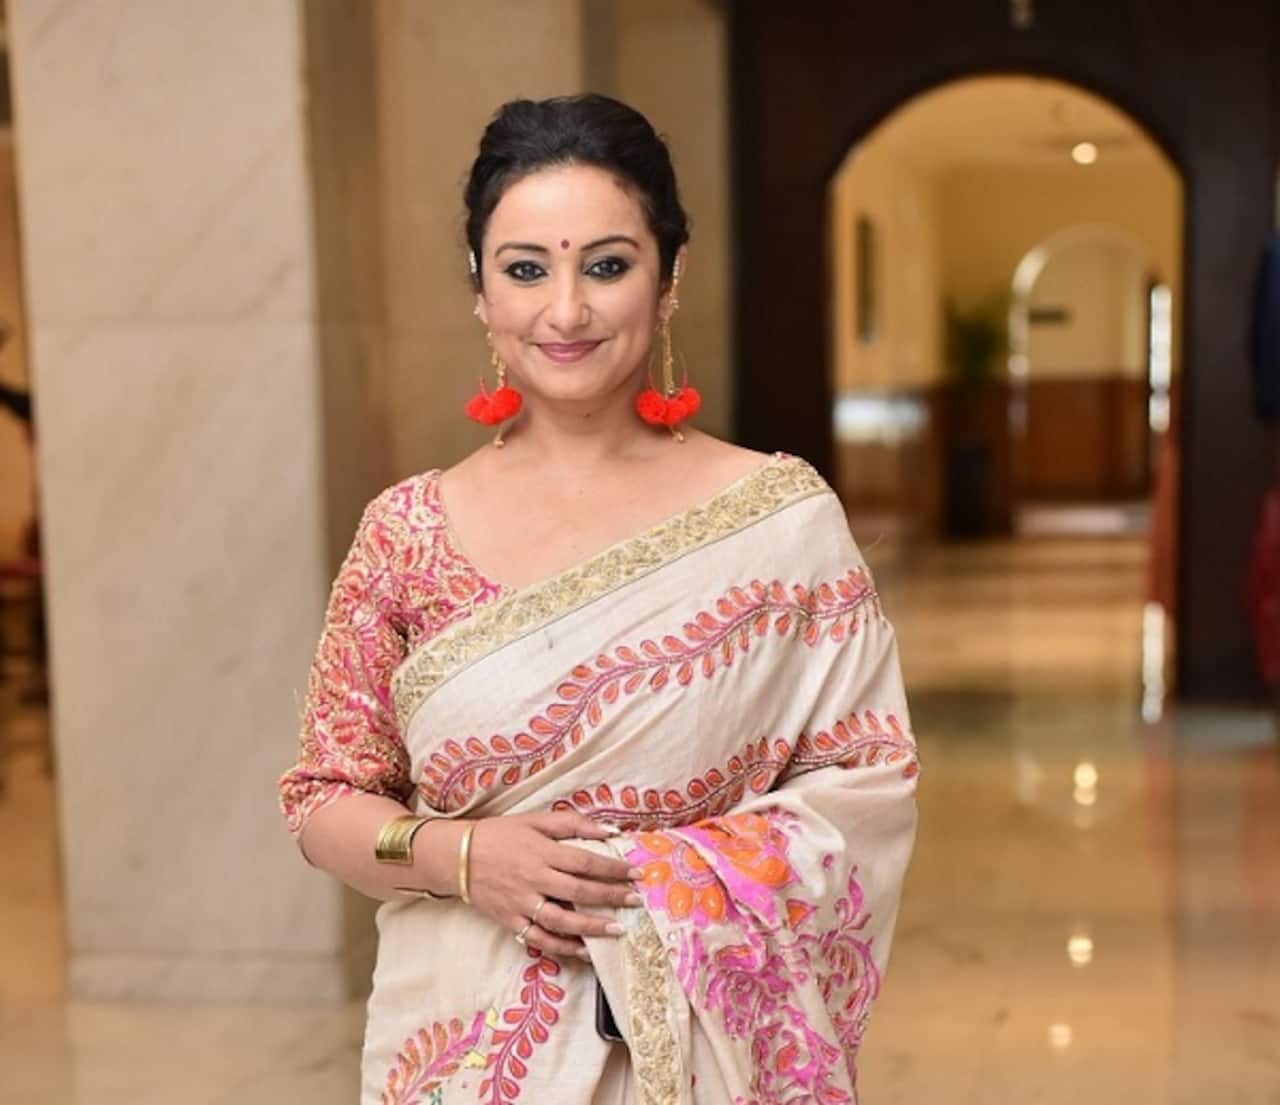 Divya Dutta On Her National Award Win The Actor In Me Feels Alive Again Bollywood News